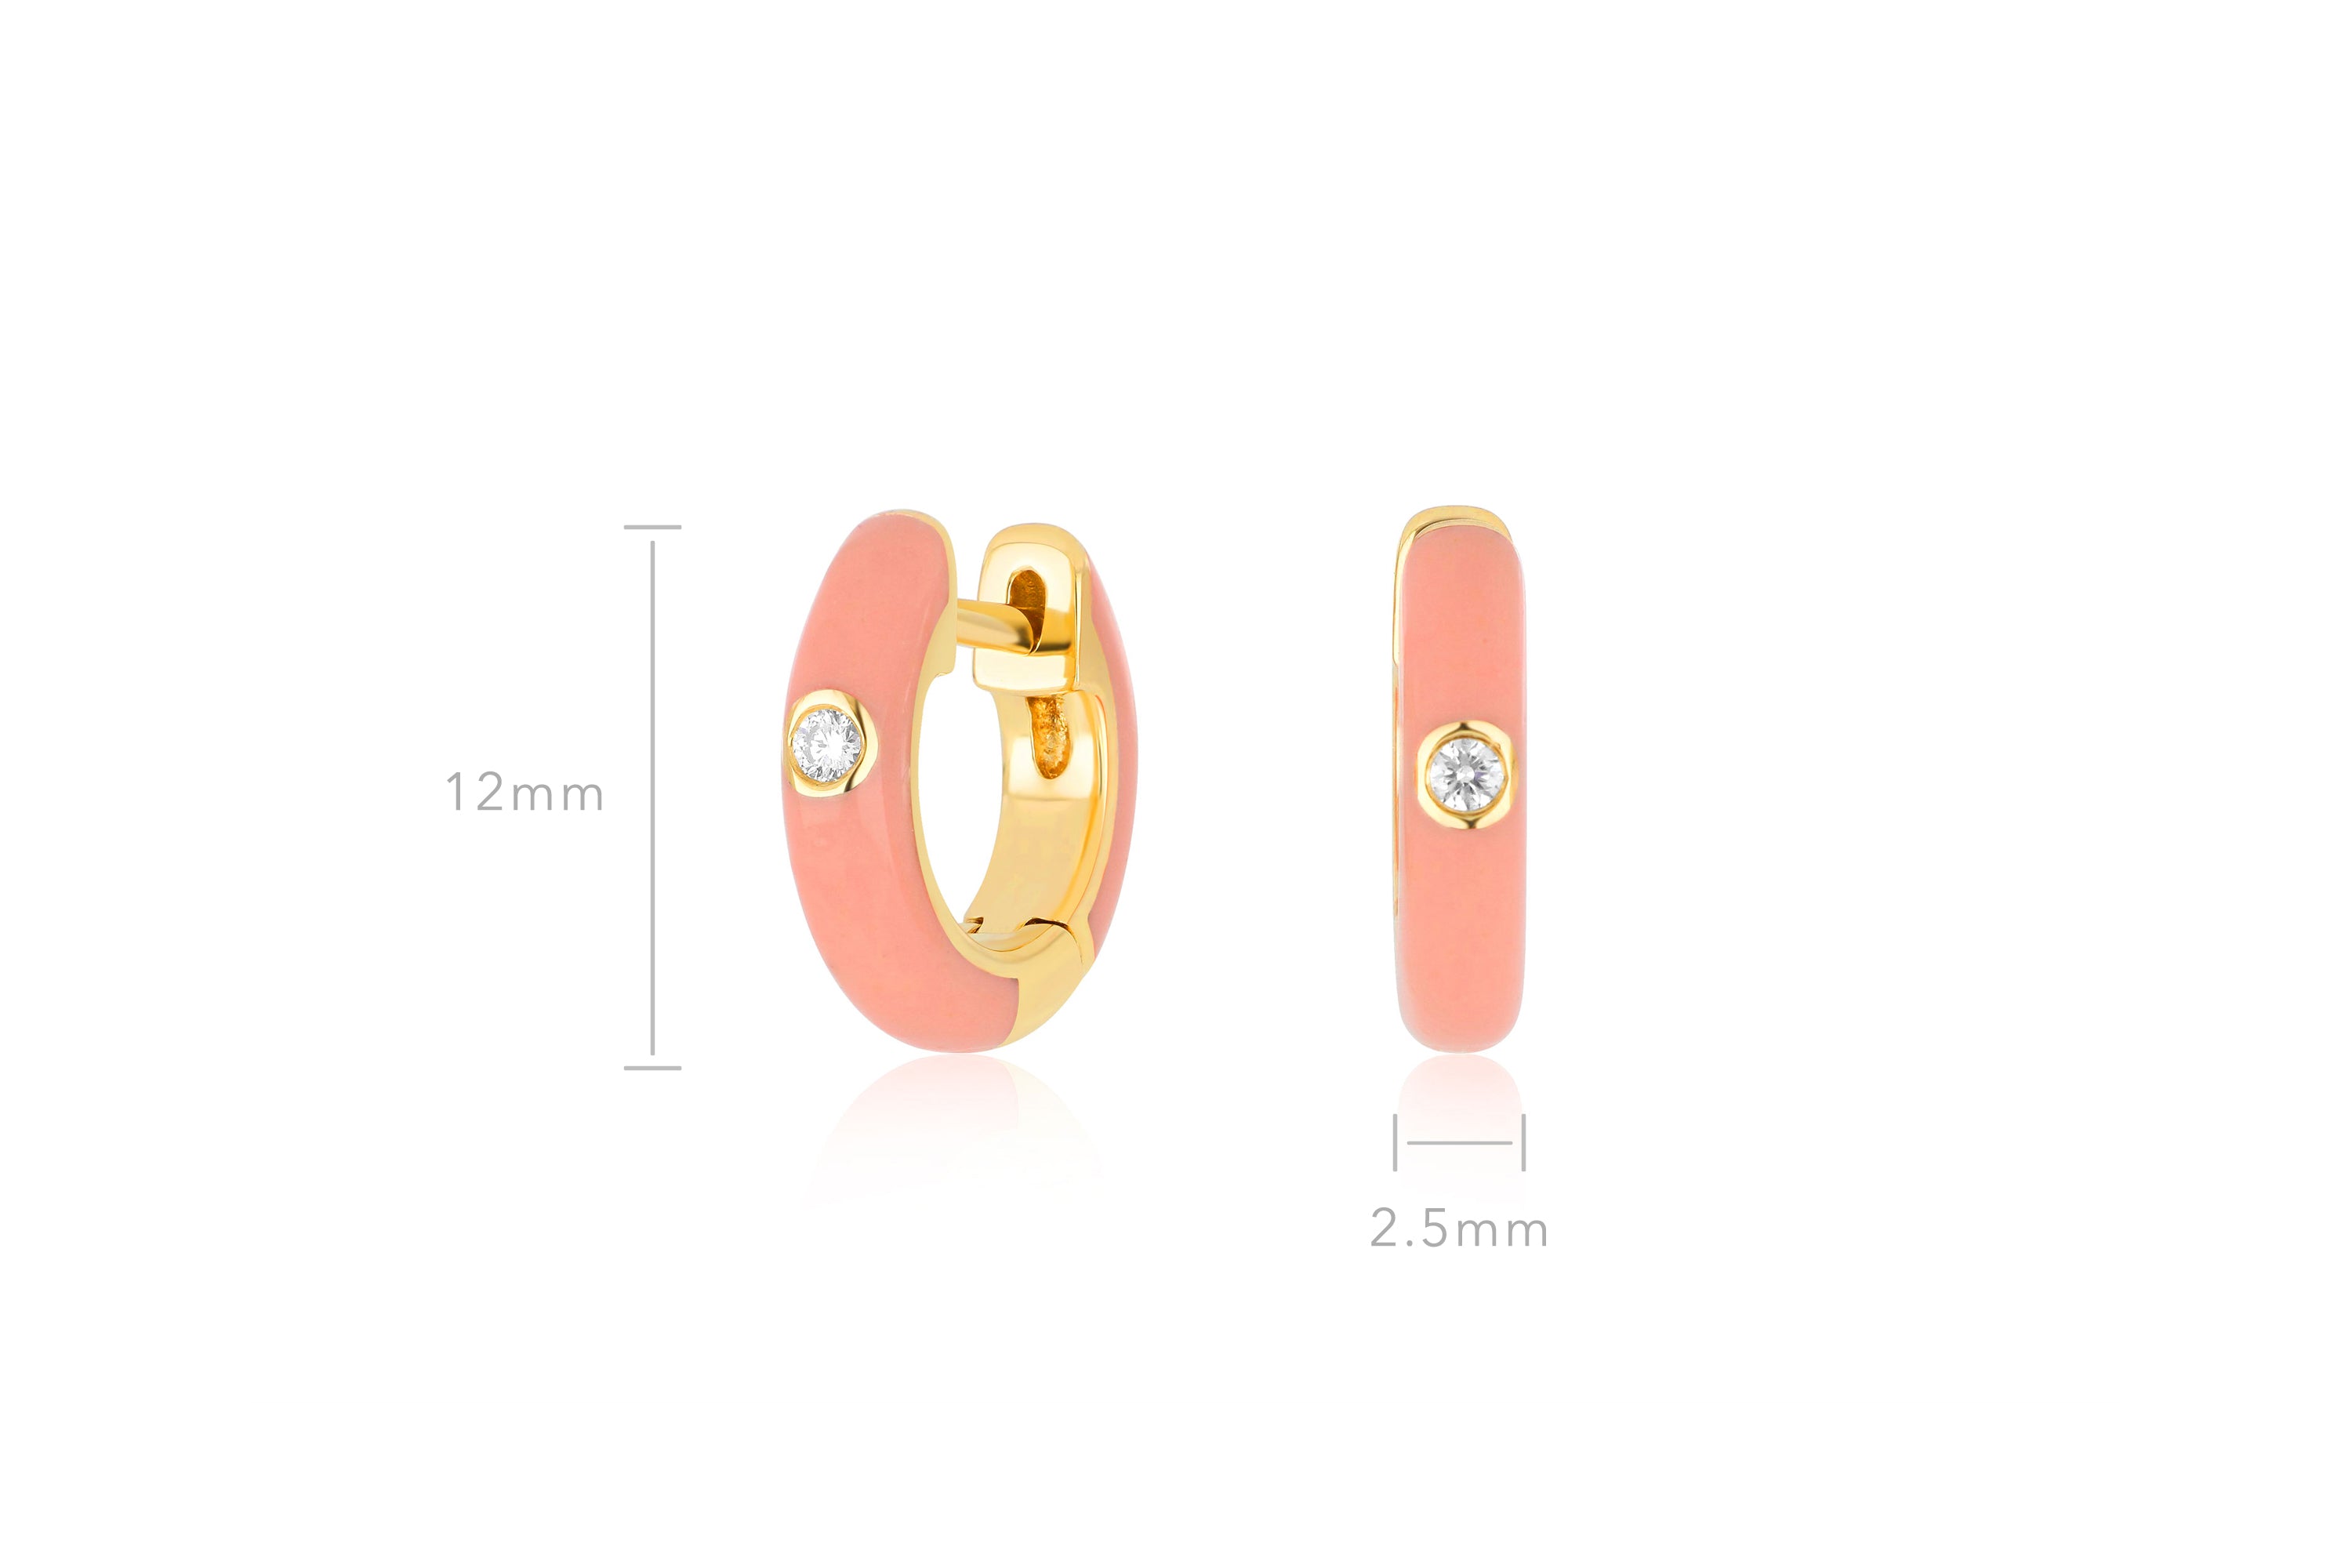 Diamond Coral Enamel Huggie Earring in 14k yellow gold with size measurement of 12mm height and 2.5mm in width